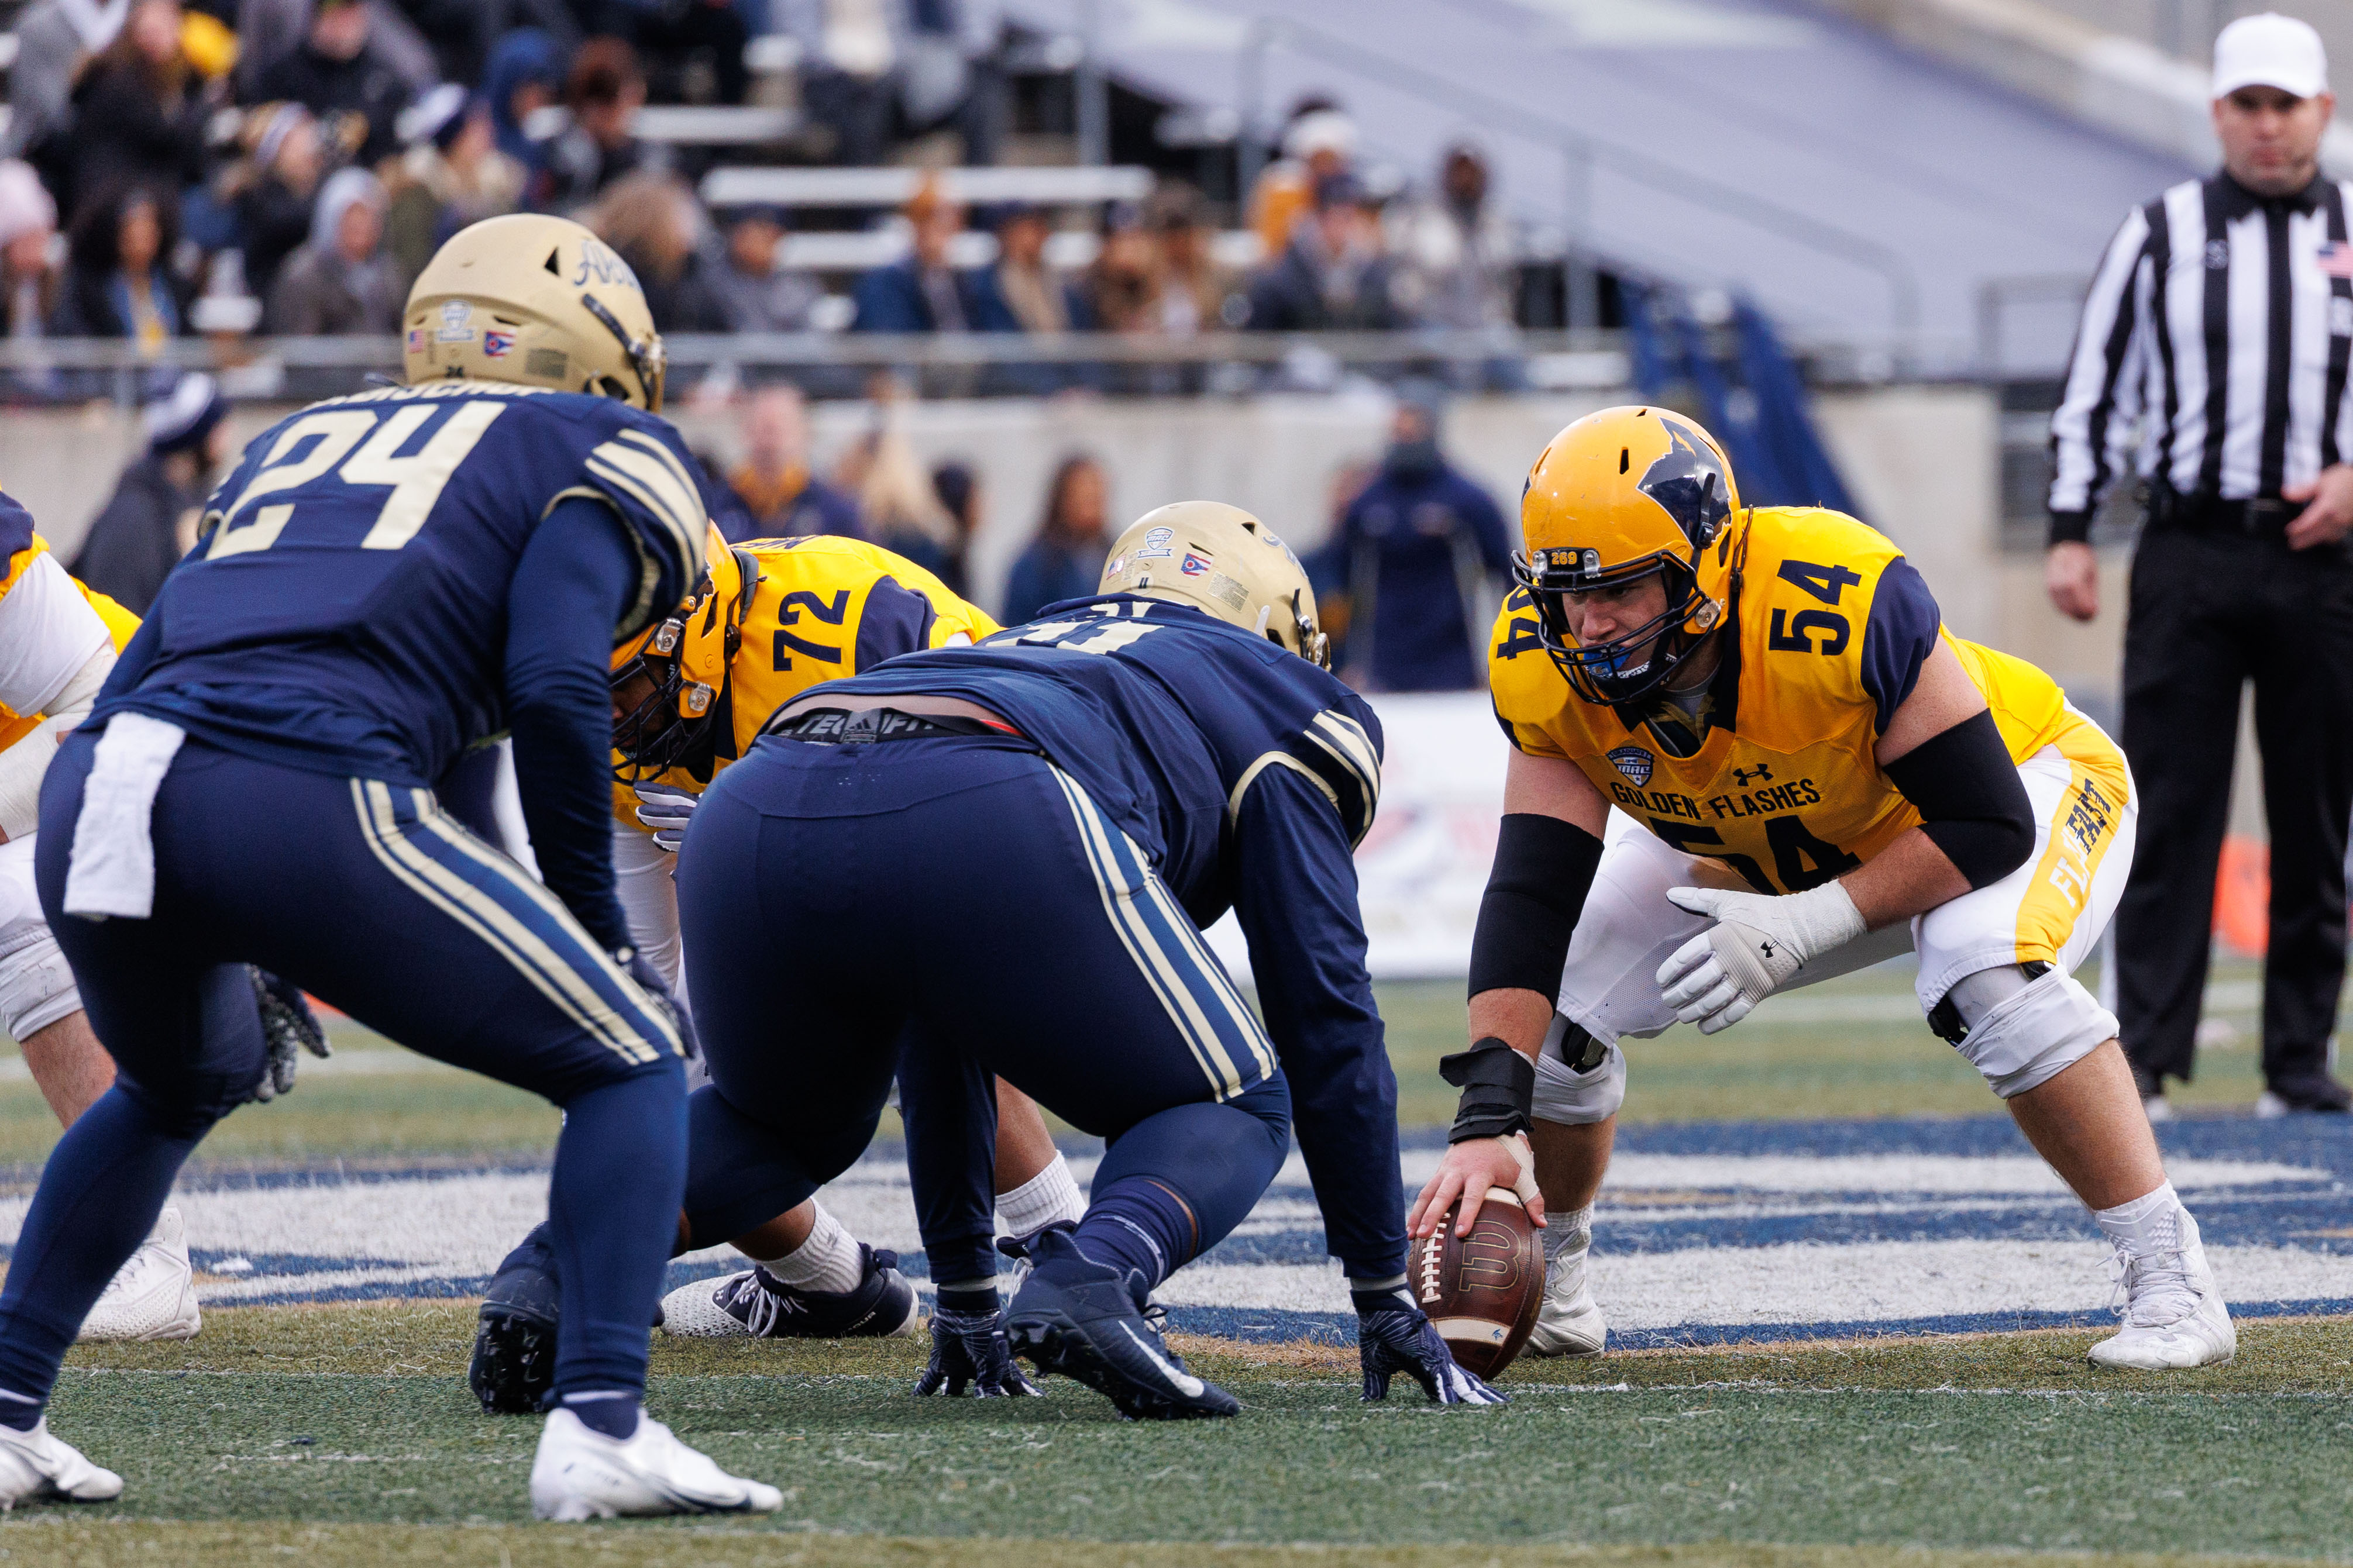 COLLEGE FOOTBALL: NOV 20 Kent State at Akron